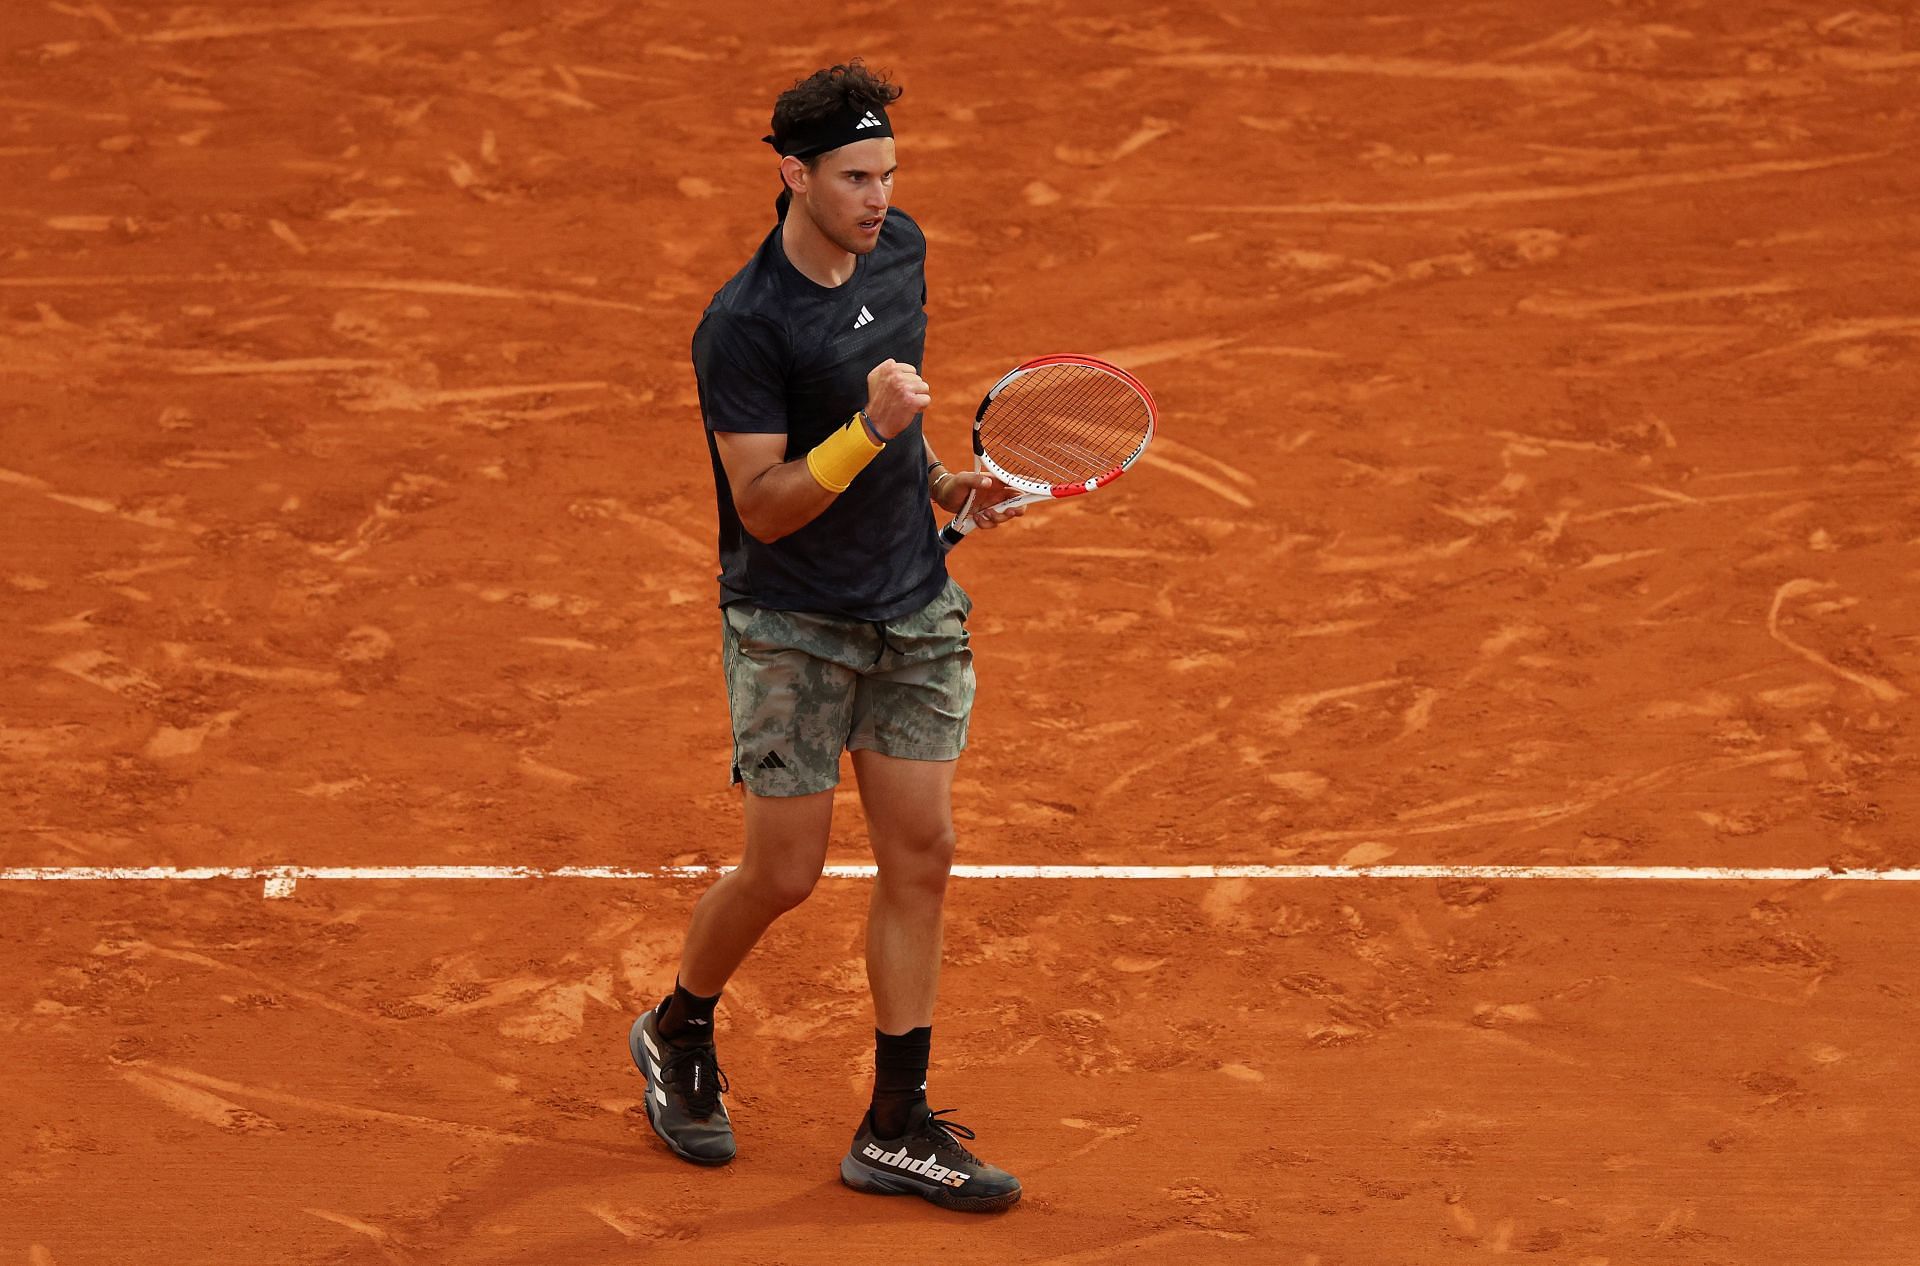 Dominic Thiem at the Rolex Monte-Carlo Masters